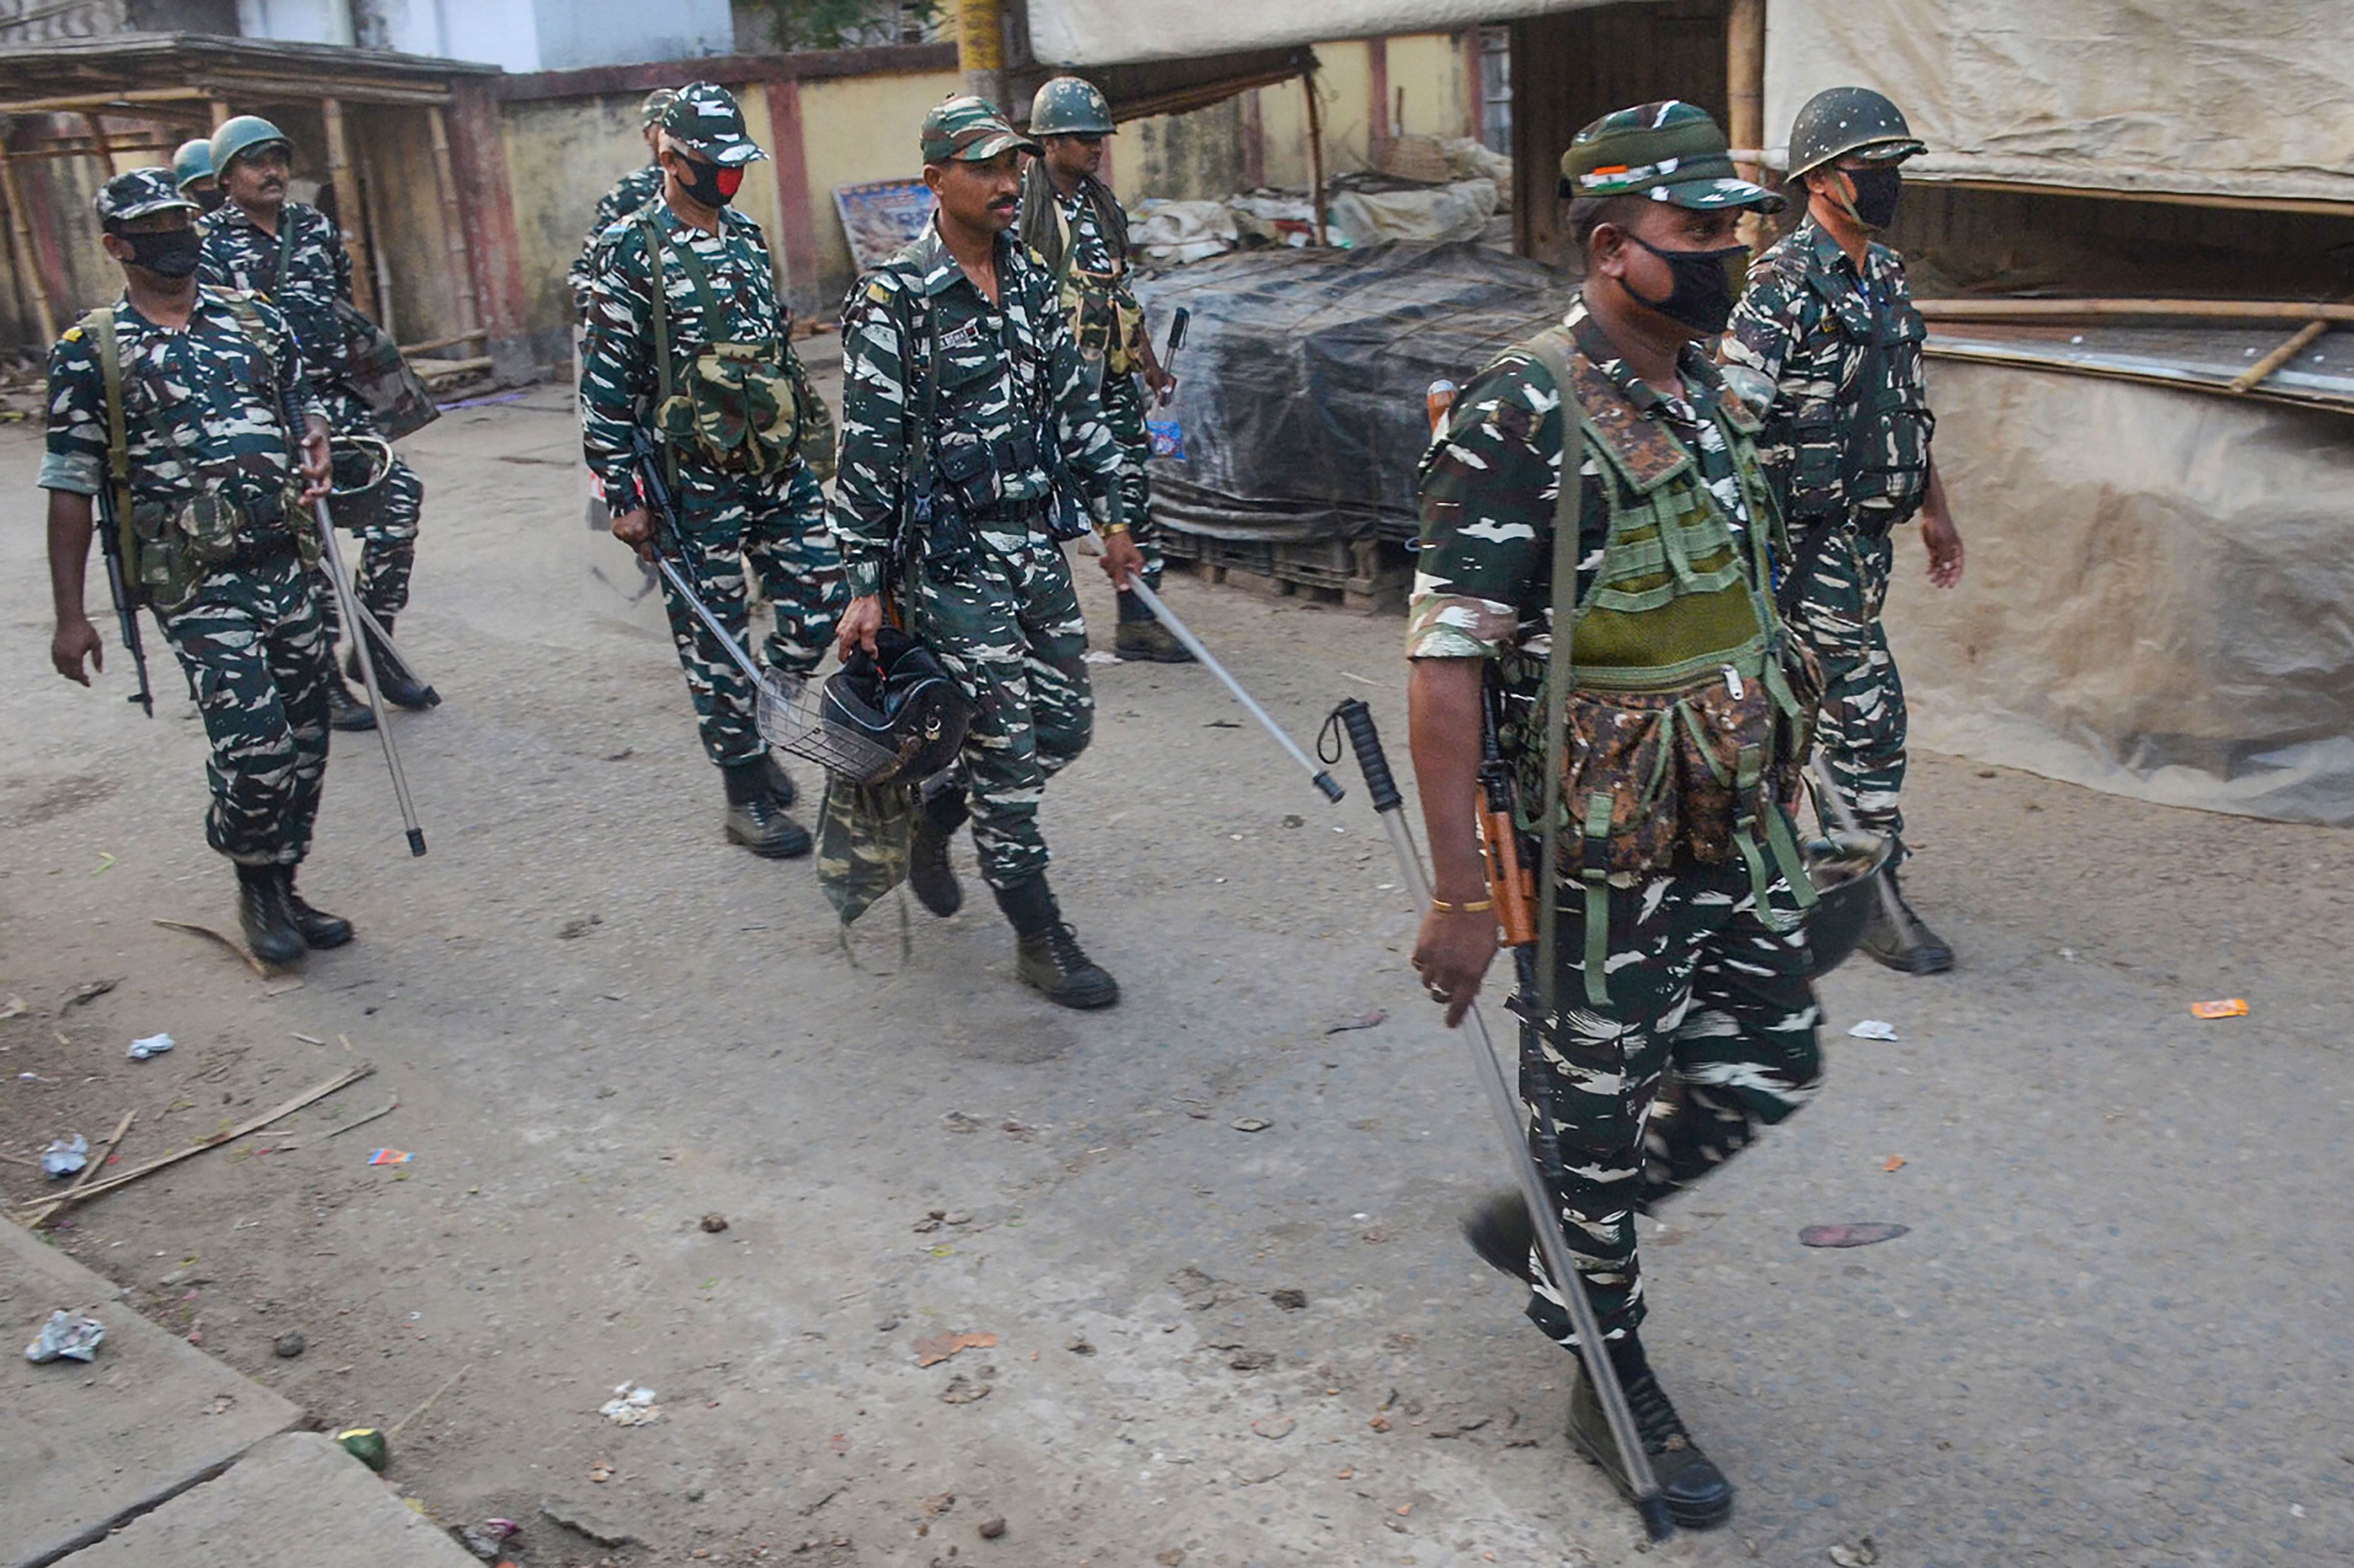 CRPF jawans conduct a flag march at a closed market during the nationwide lockdown in Agartala. (Credit: PTI)